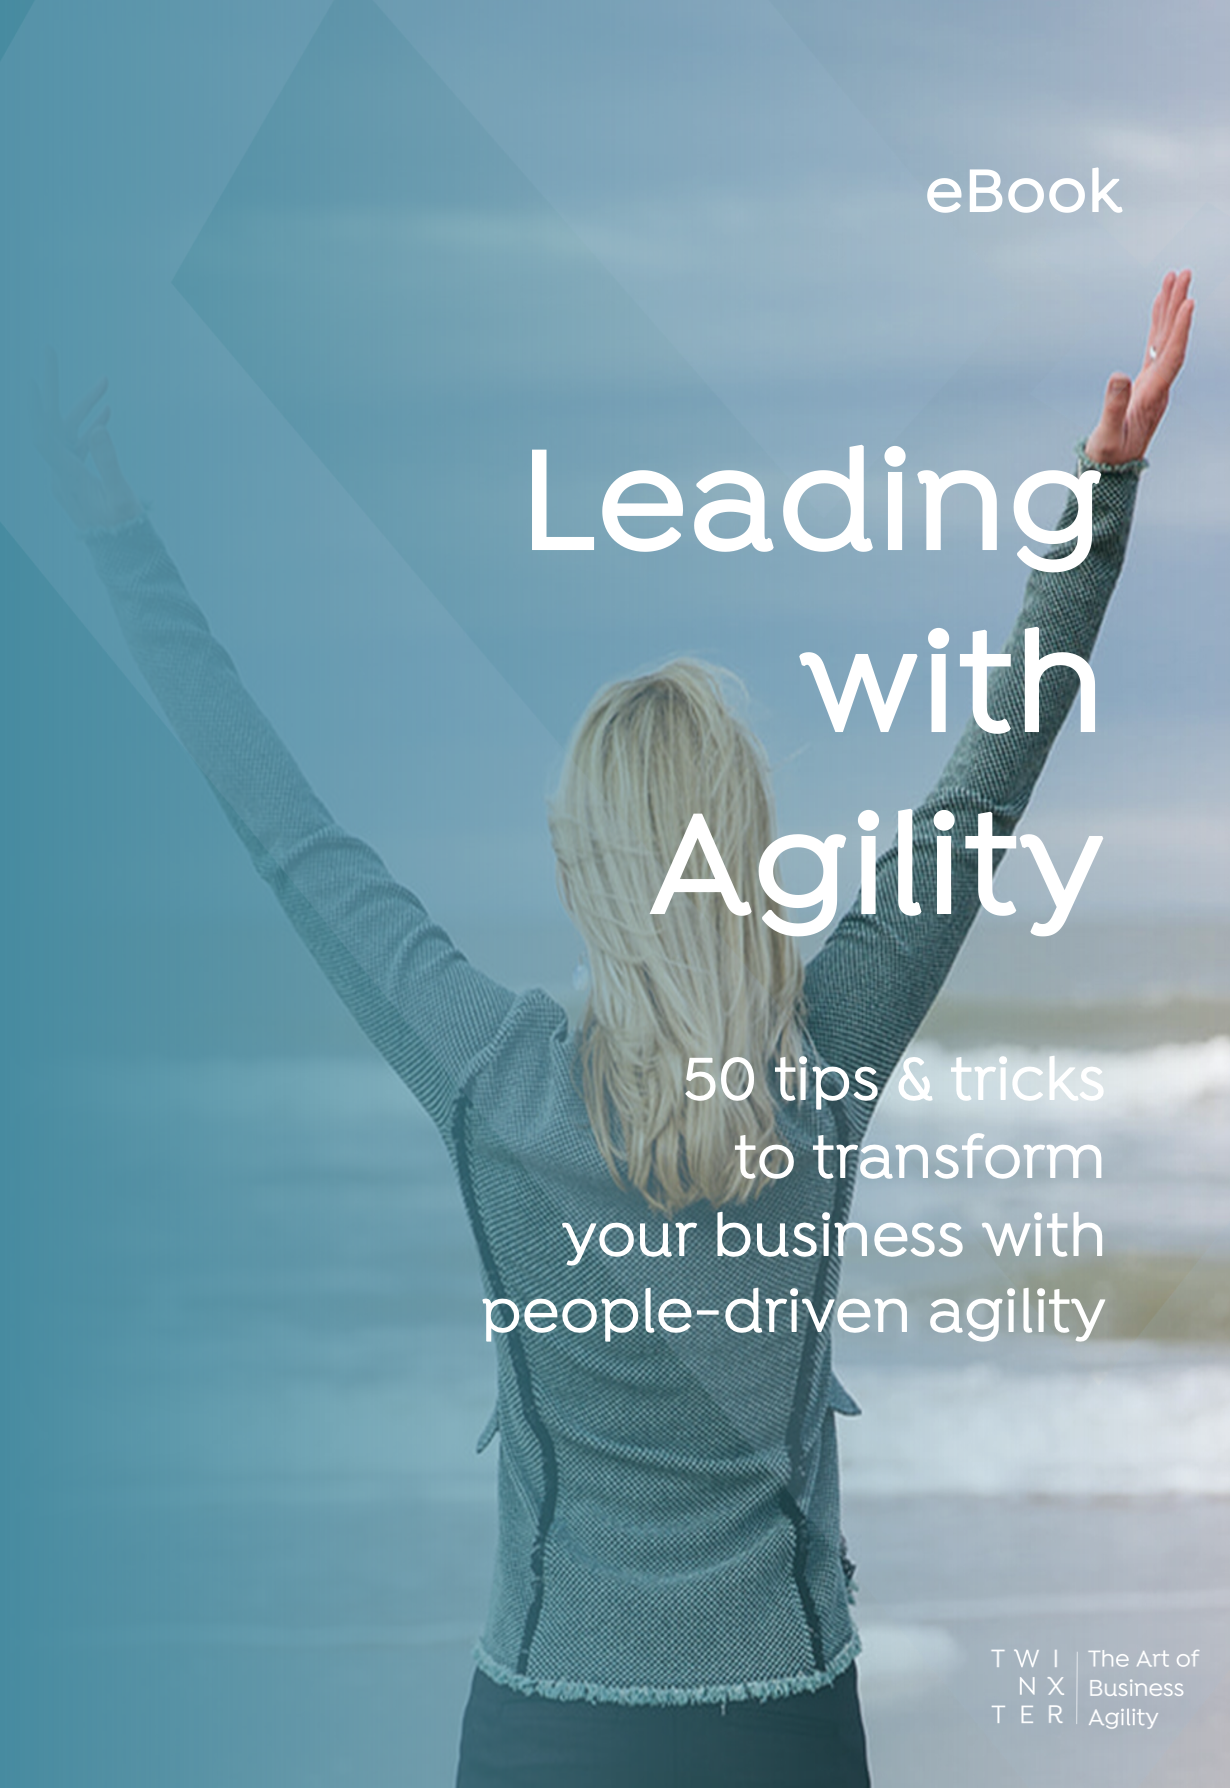 eBook Leading with Agility